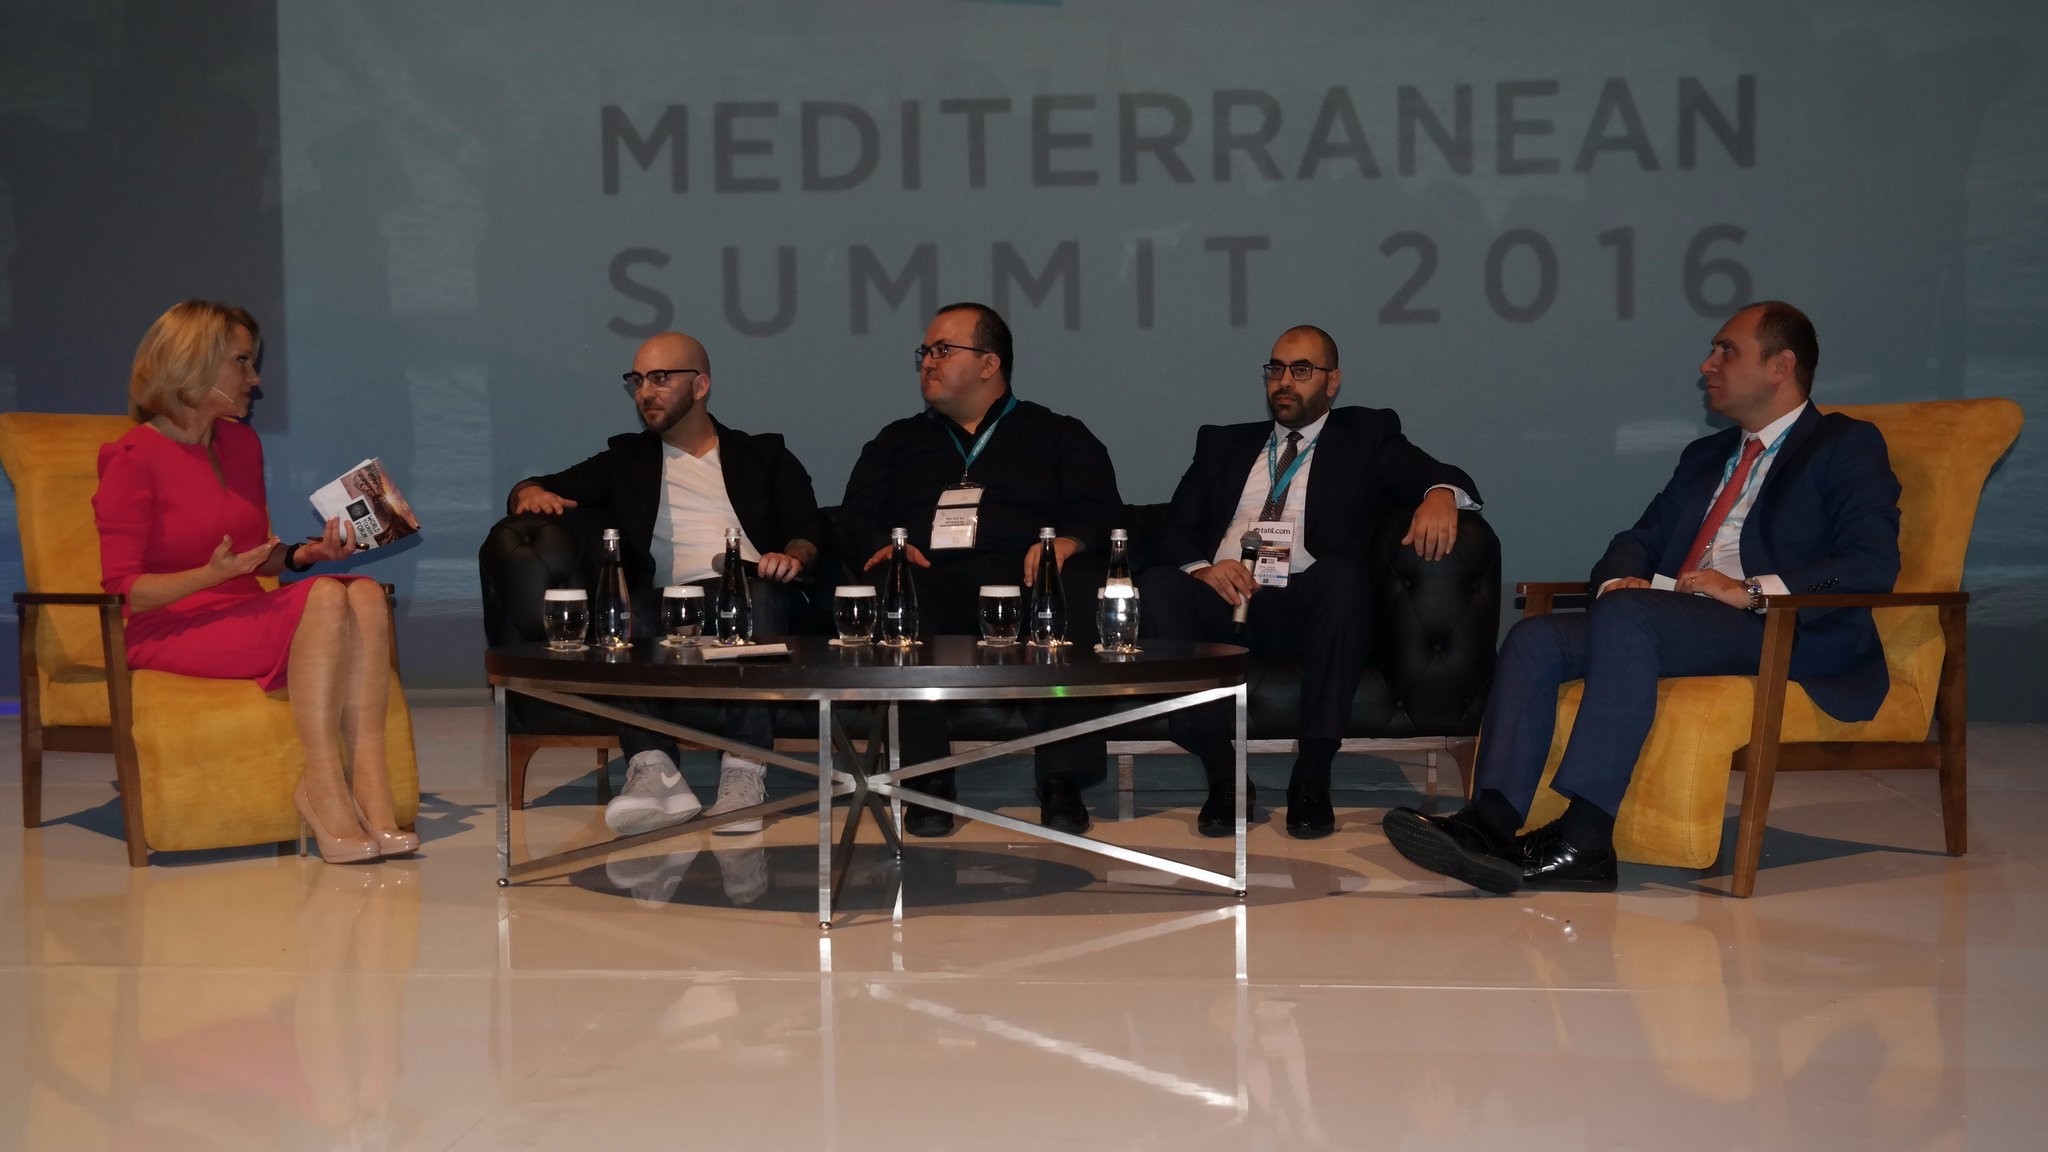 K. Madera (L) of BBC World News moderates the u201cMulti-Channel Usage of Tourismu201d session in which W. Isbrucker (Booking), E. u00c7elik (Head of Sales Facebook), B. Badr (Attar Travel), & A. u0130u015fbulan (Gen. Manager TAV Op. Serv.) speak (from left to right).